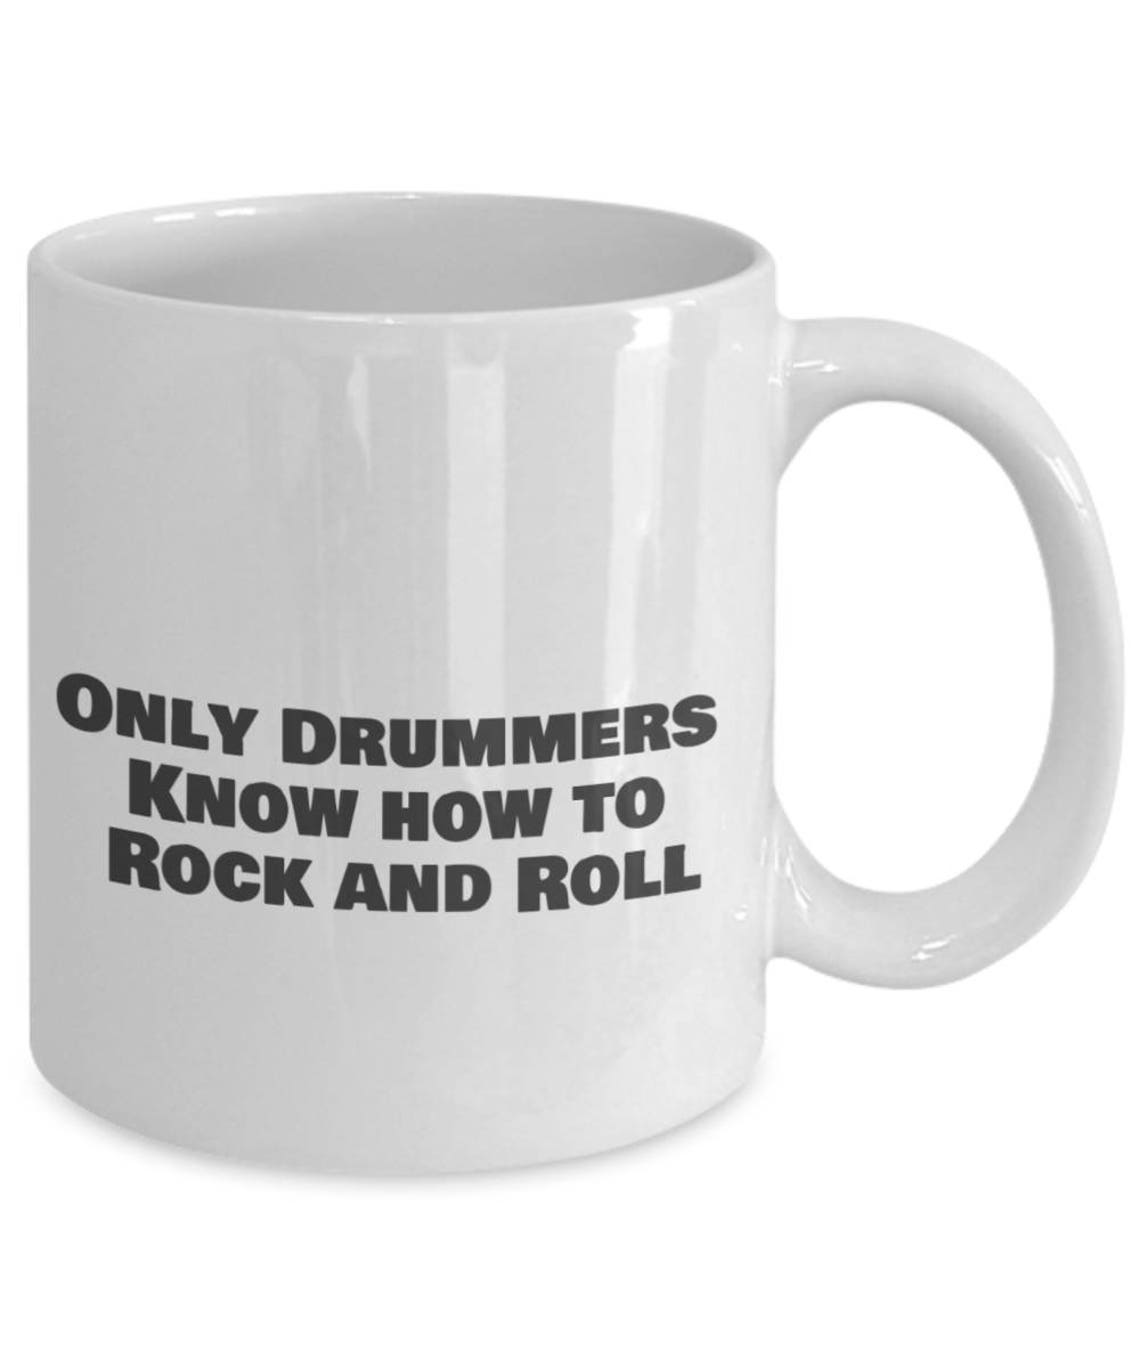 Only Drummers know how to rock and roll Musician gift idea